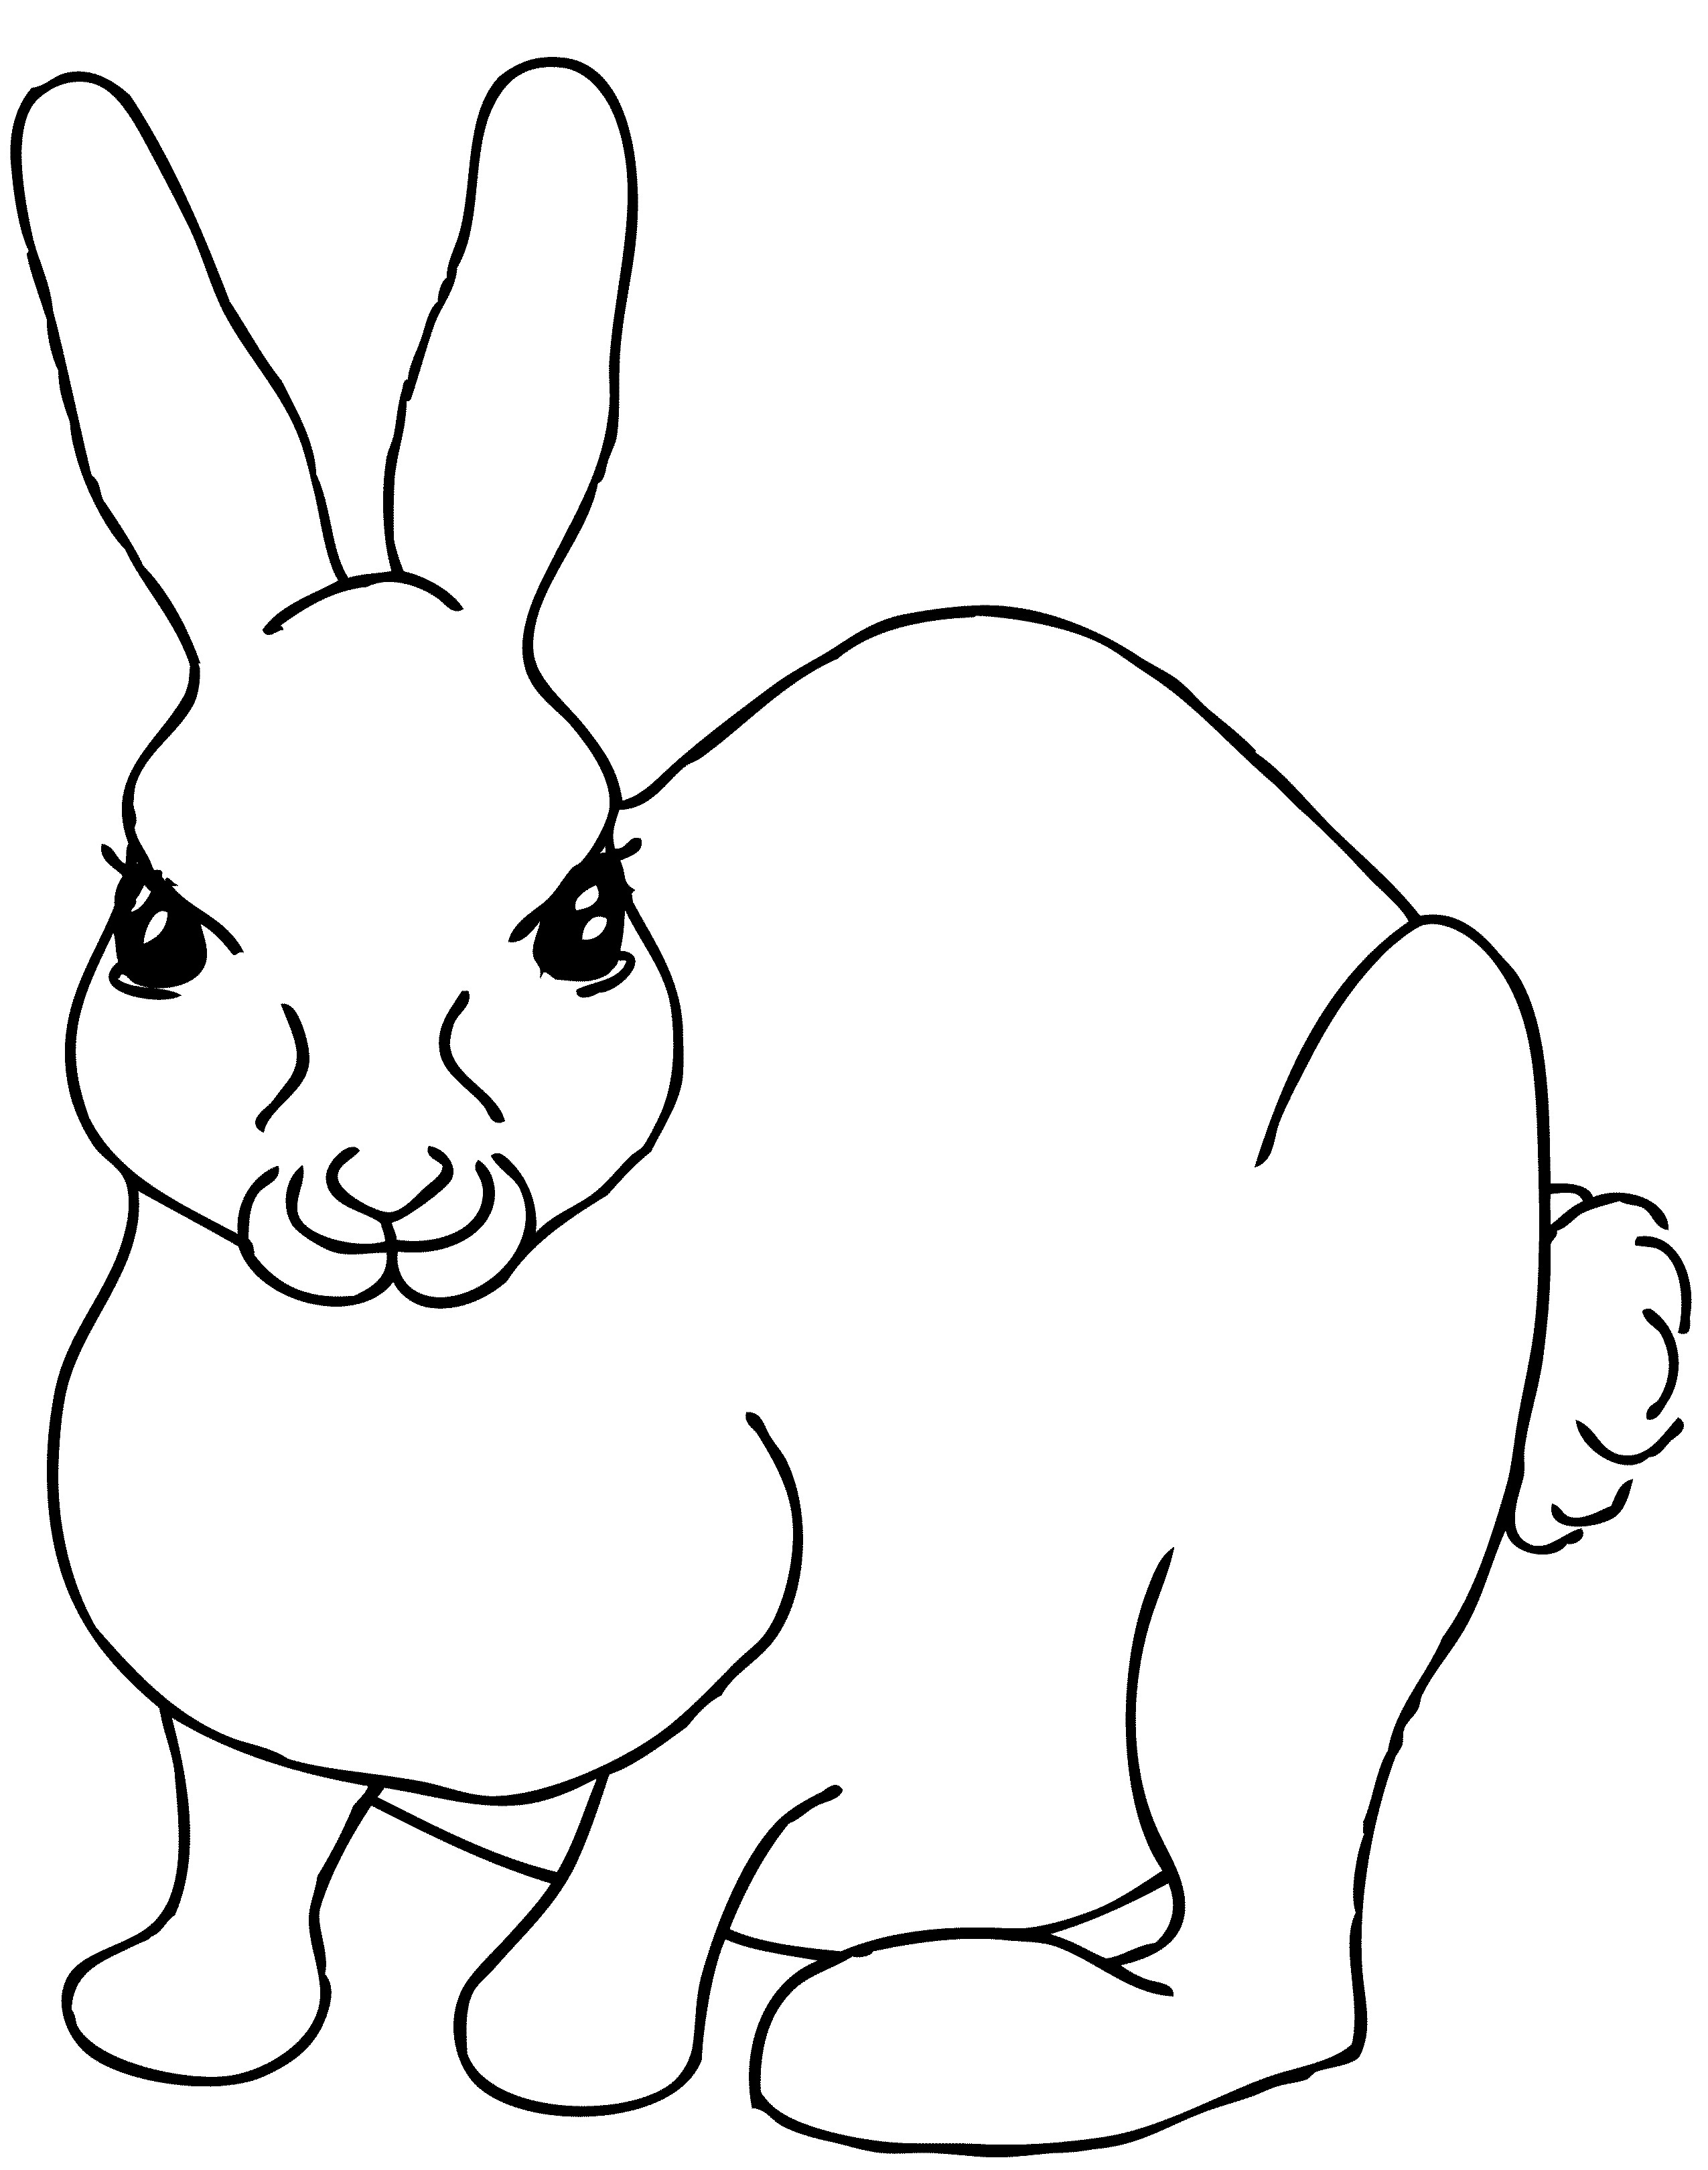 free-printable-rabbit-coloring-pages-for-kids-animal-place